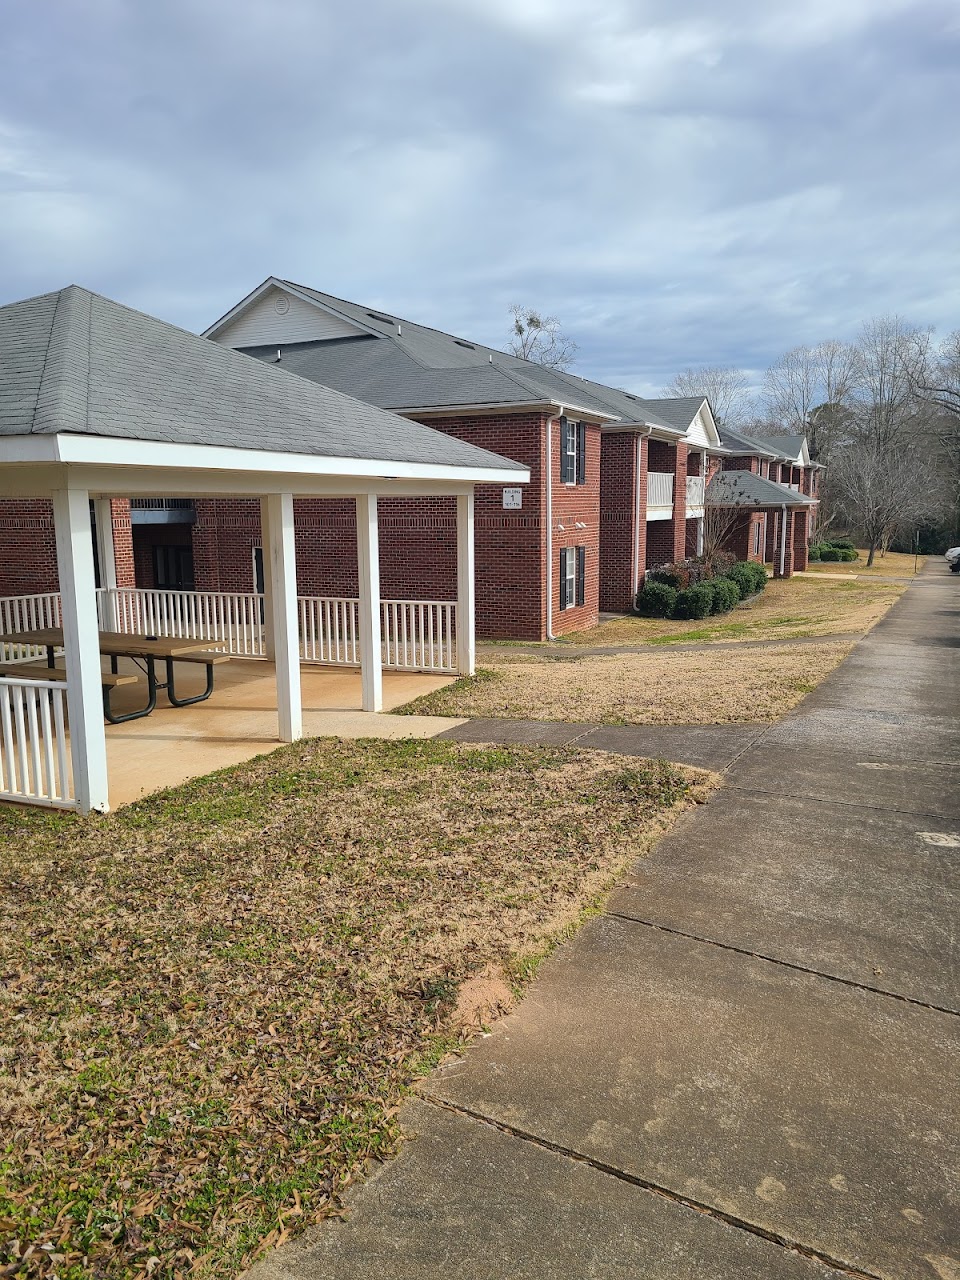 Photo of MAYBERRY PARK at 169 E CASS ST DADEVILLE, AL 36853